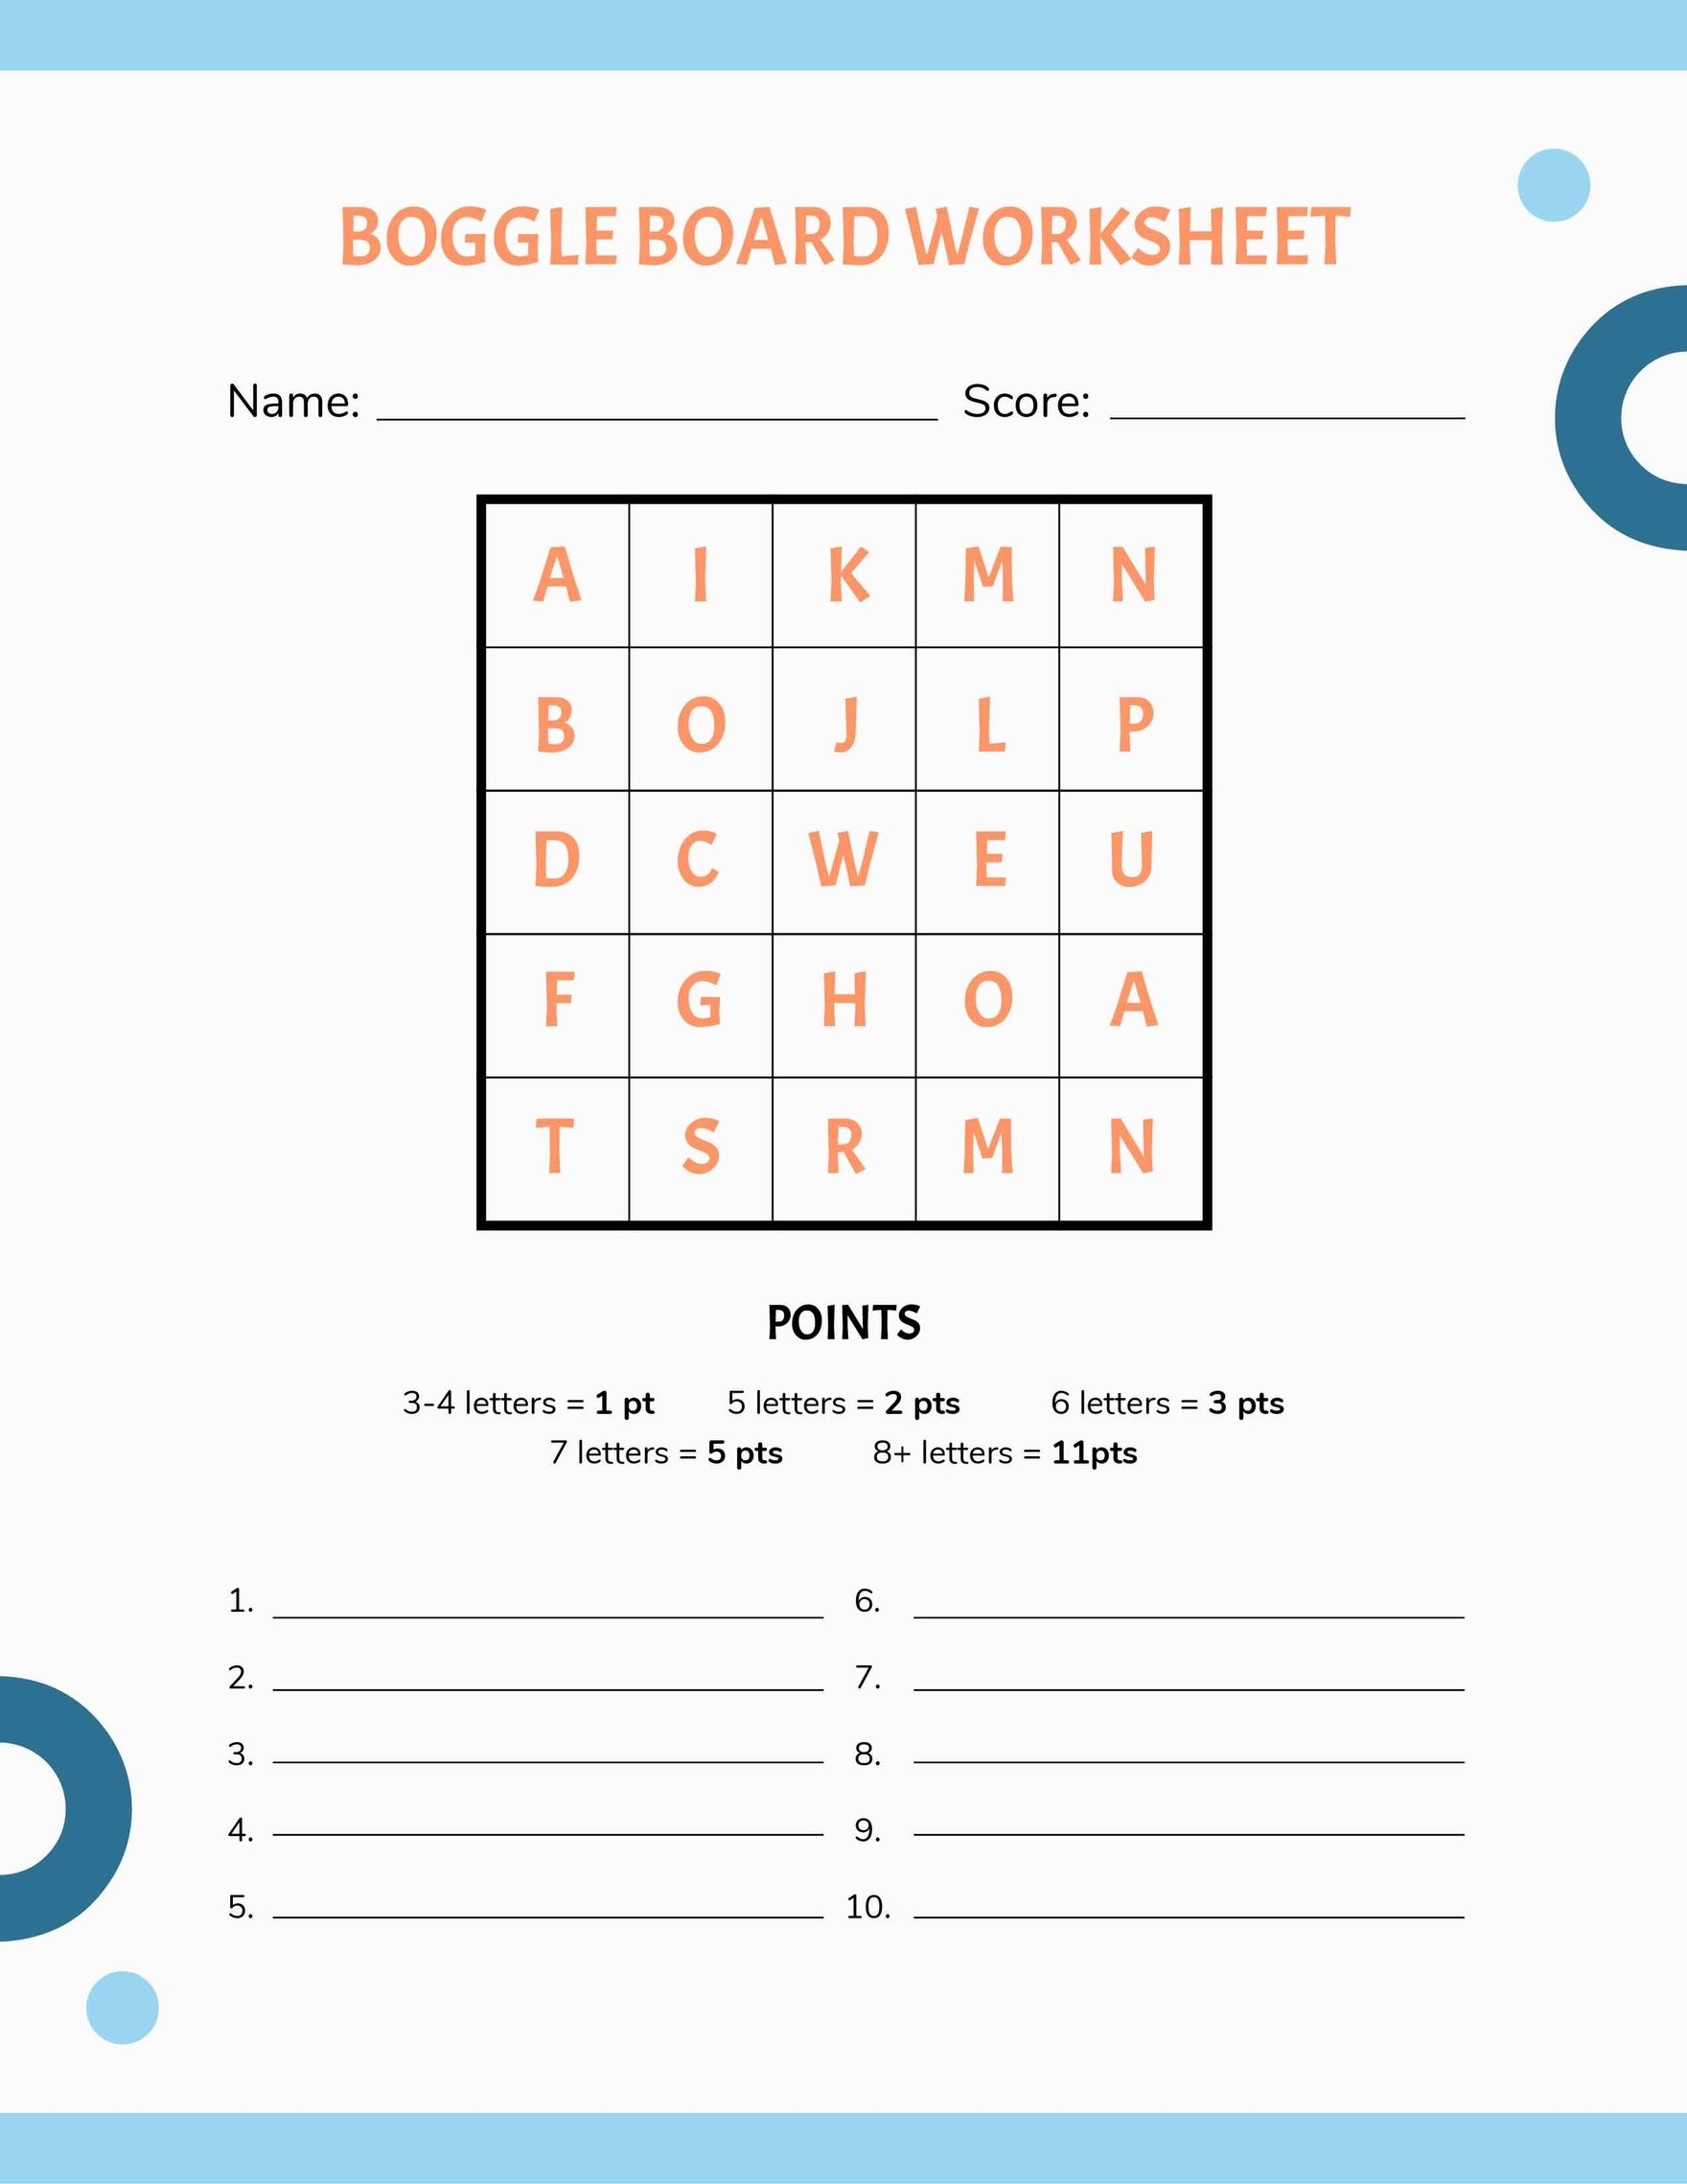 boggle-board-recording-sheet-template-google-docs-word-apple-pages